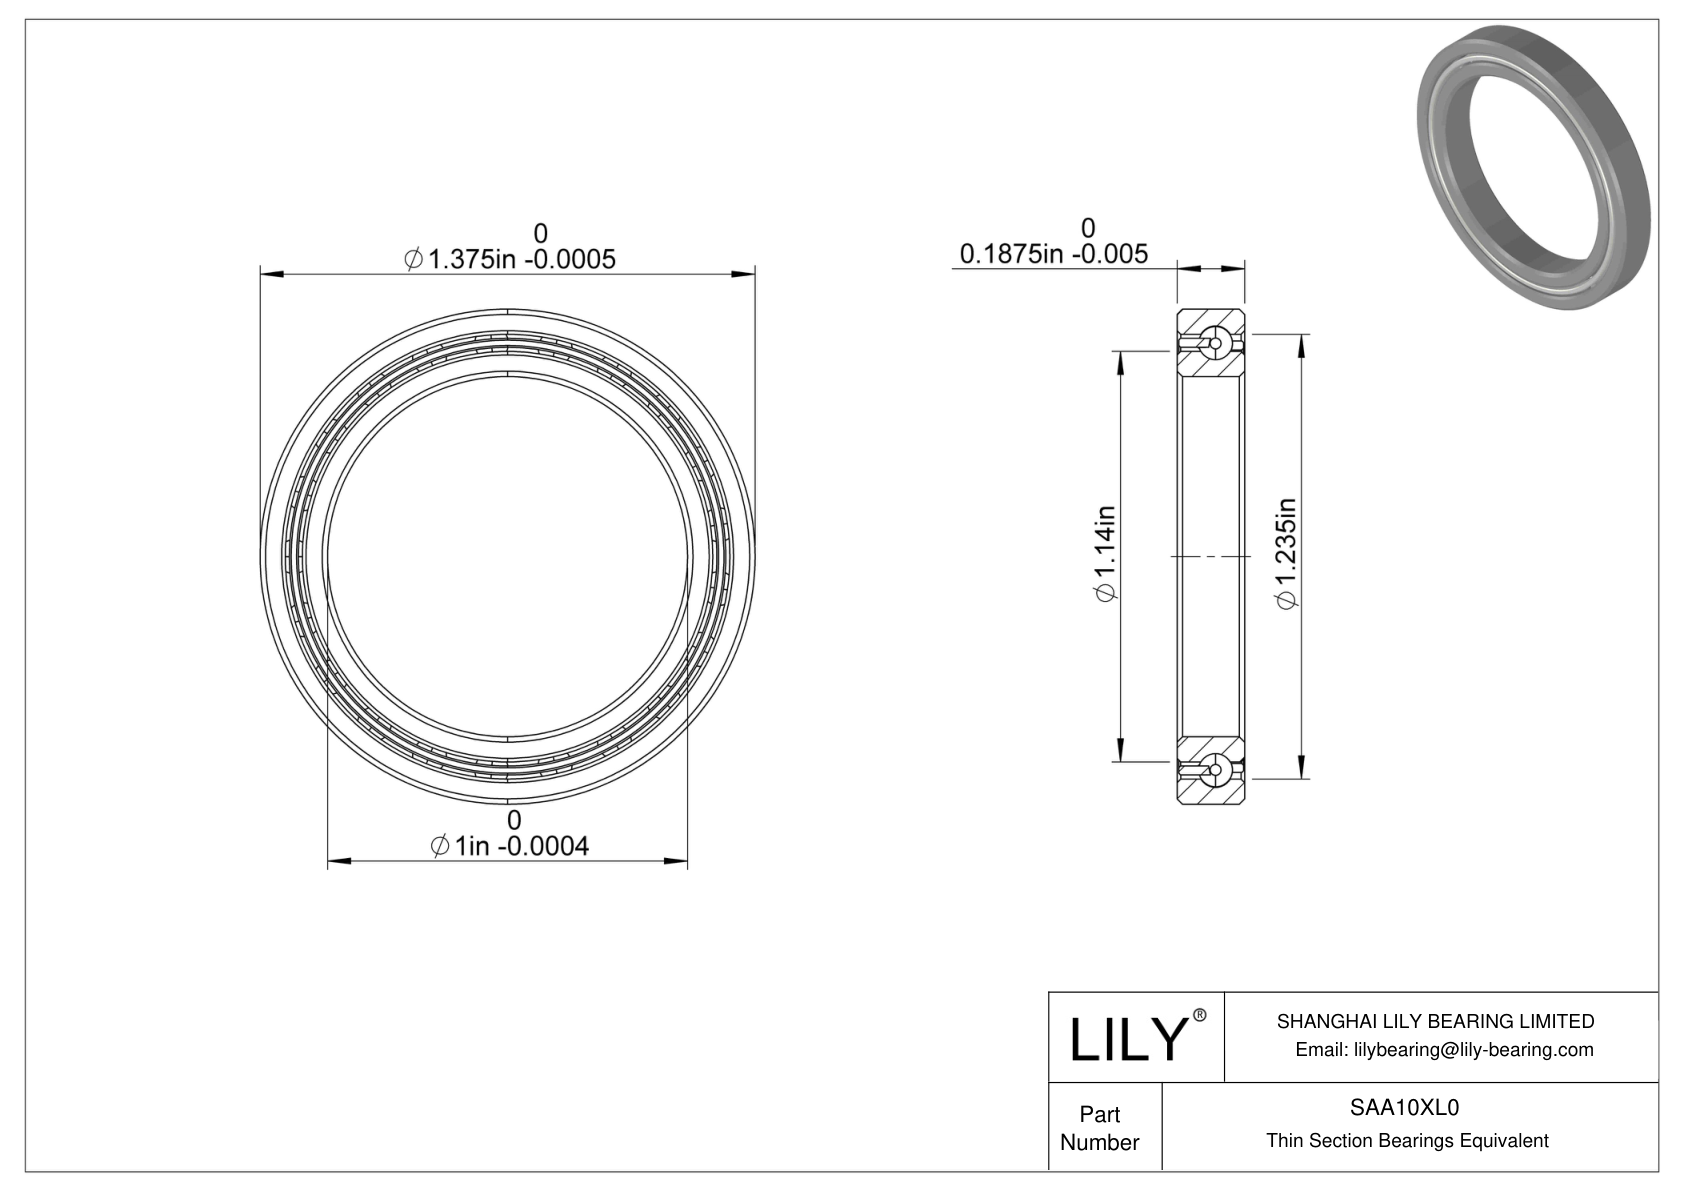 SAA10XL0 Constant Section (CS) Bearings cad drawing